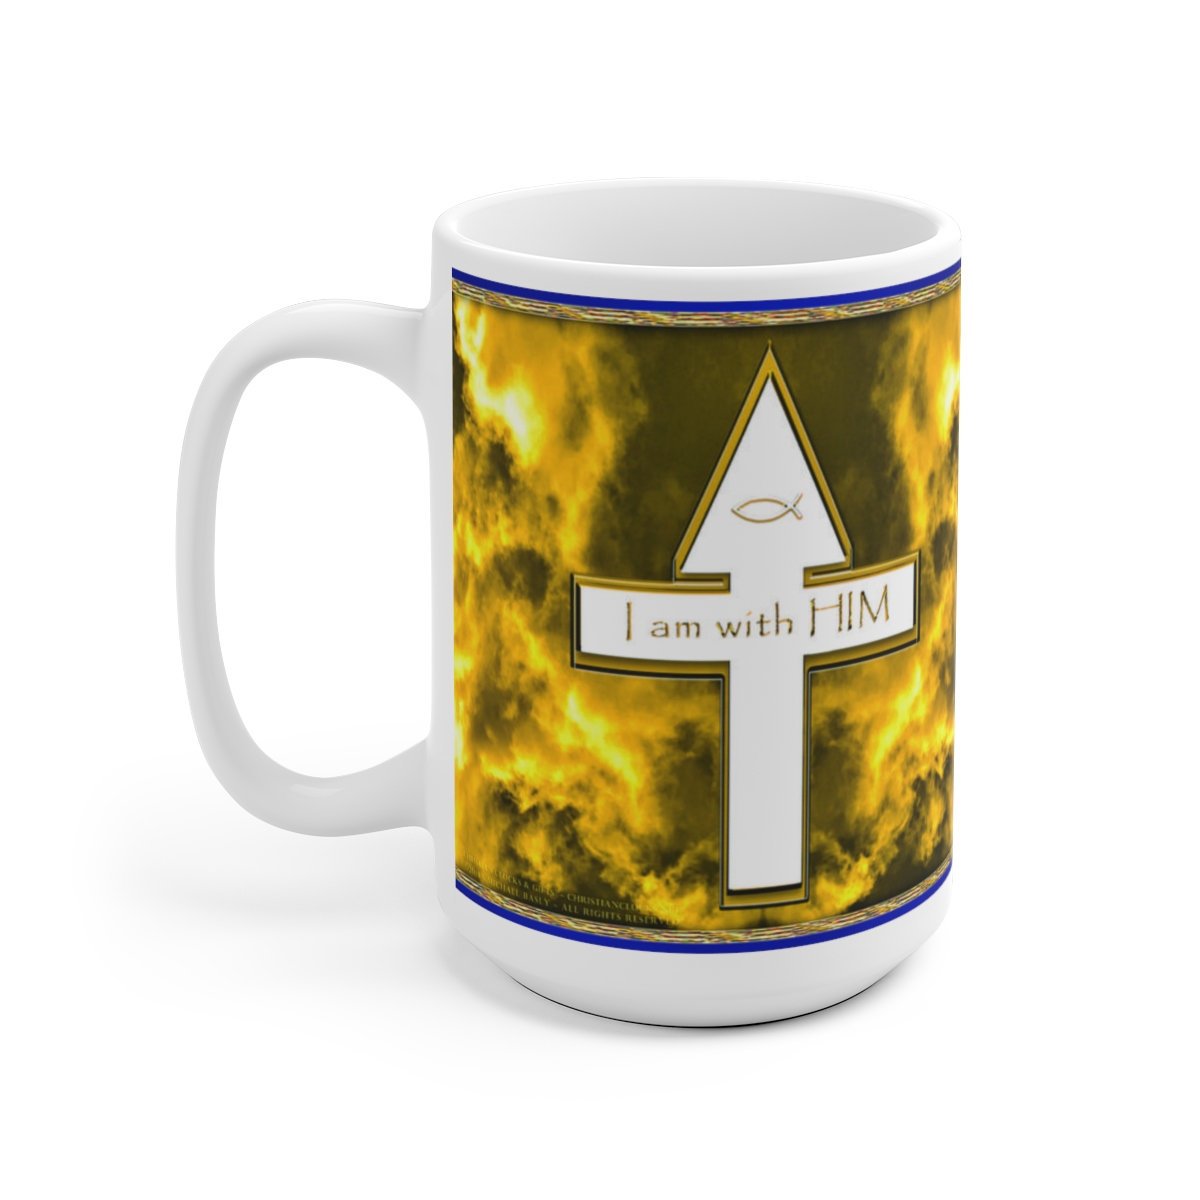 Religious 'I am with HIM' Sunbright Full Image Mug 15oz. Printed in U.S.A. Art By S.Michael. Ceramic. Vibrant Colors. etsy.me/2Xe6Qol #housewares #white #yes #ceramic #religious #religiousmug #originalart #originalartmug #christian